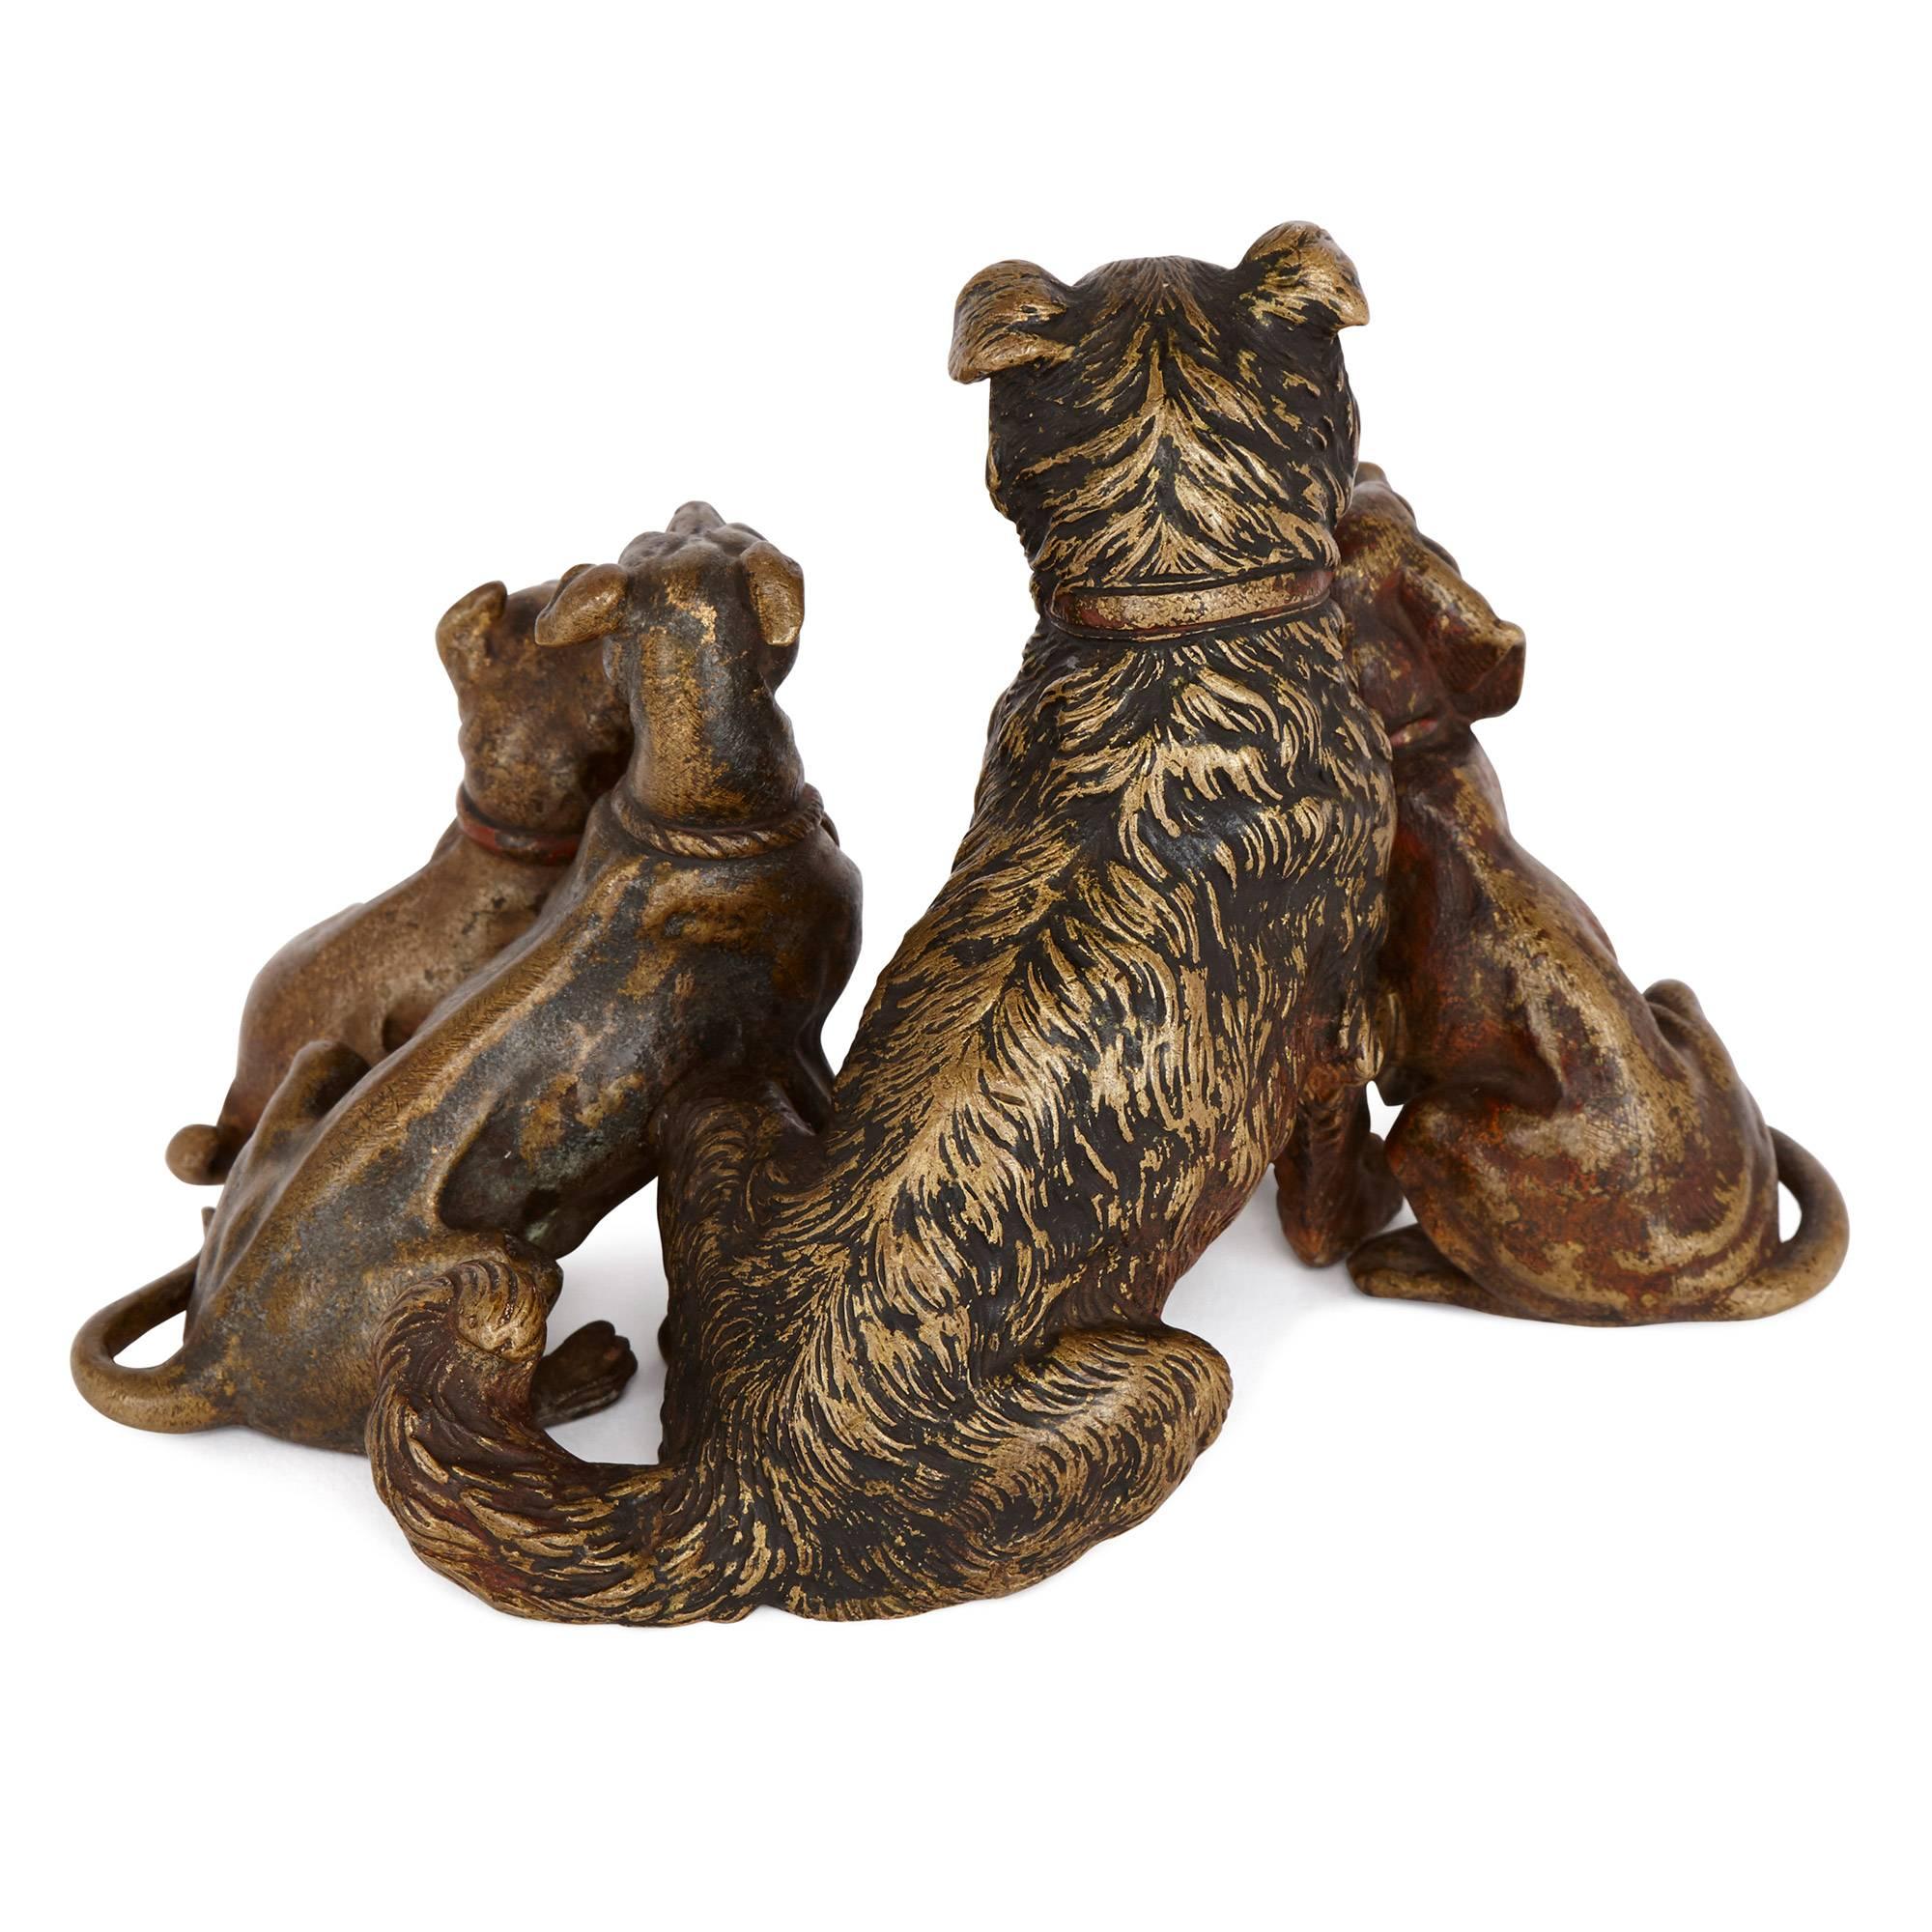 Austrian Antique Viennese Cold Painted Bronze Dogs, Attributed to Bergman